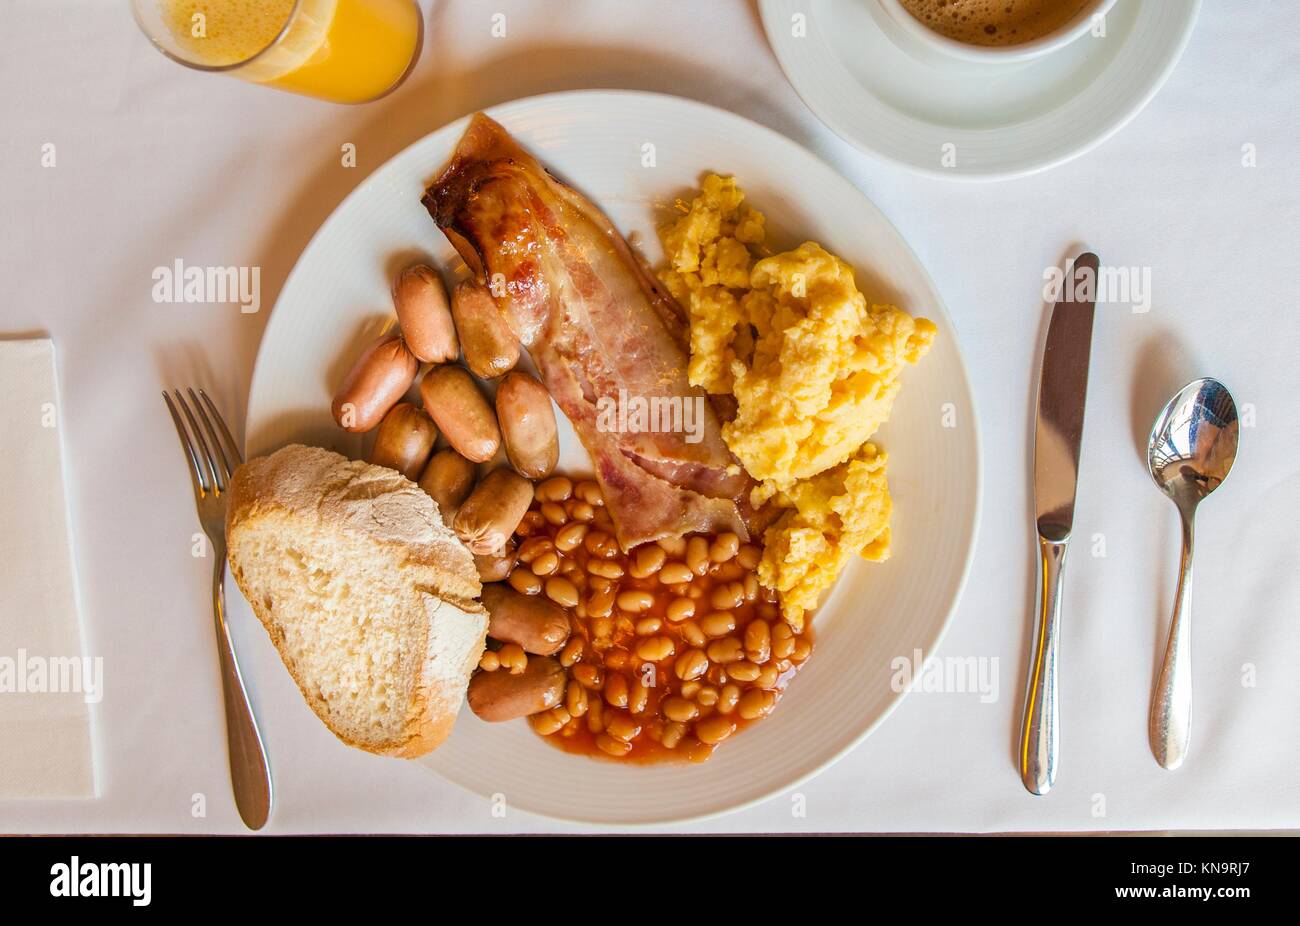 Nutritious english breakfast on a plate with bread, orange juice and and coffee cup. Stock Photo